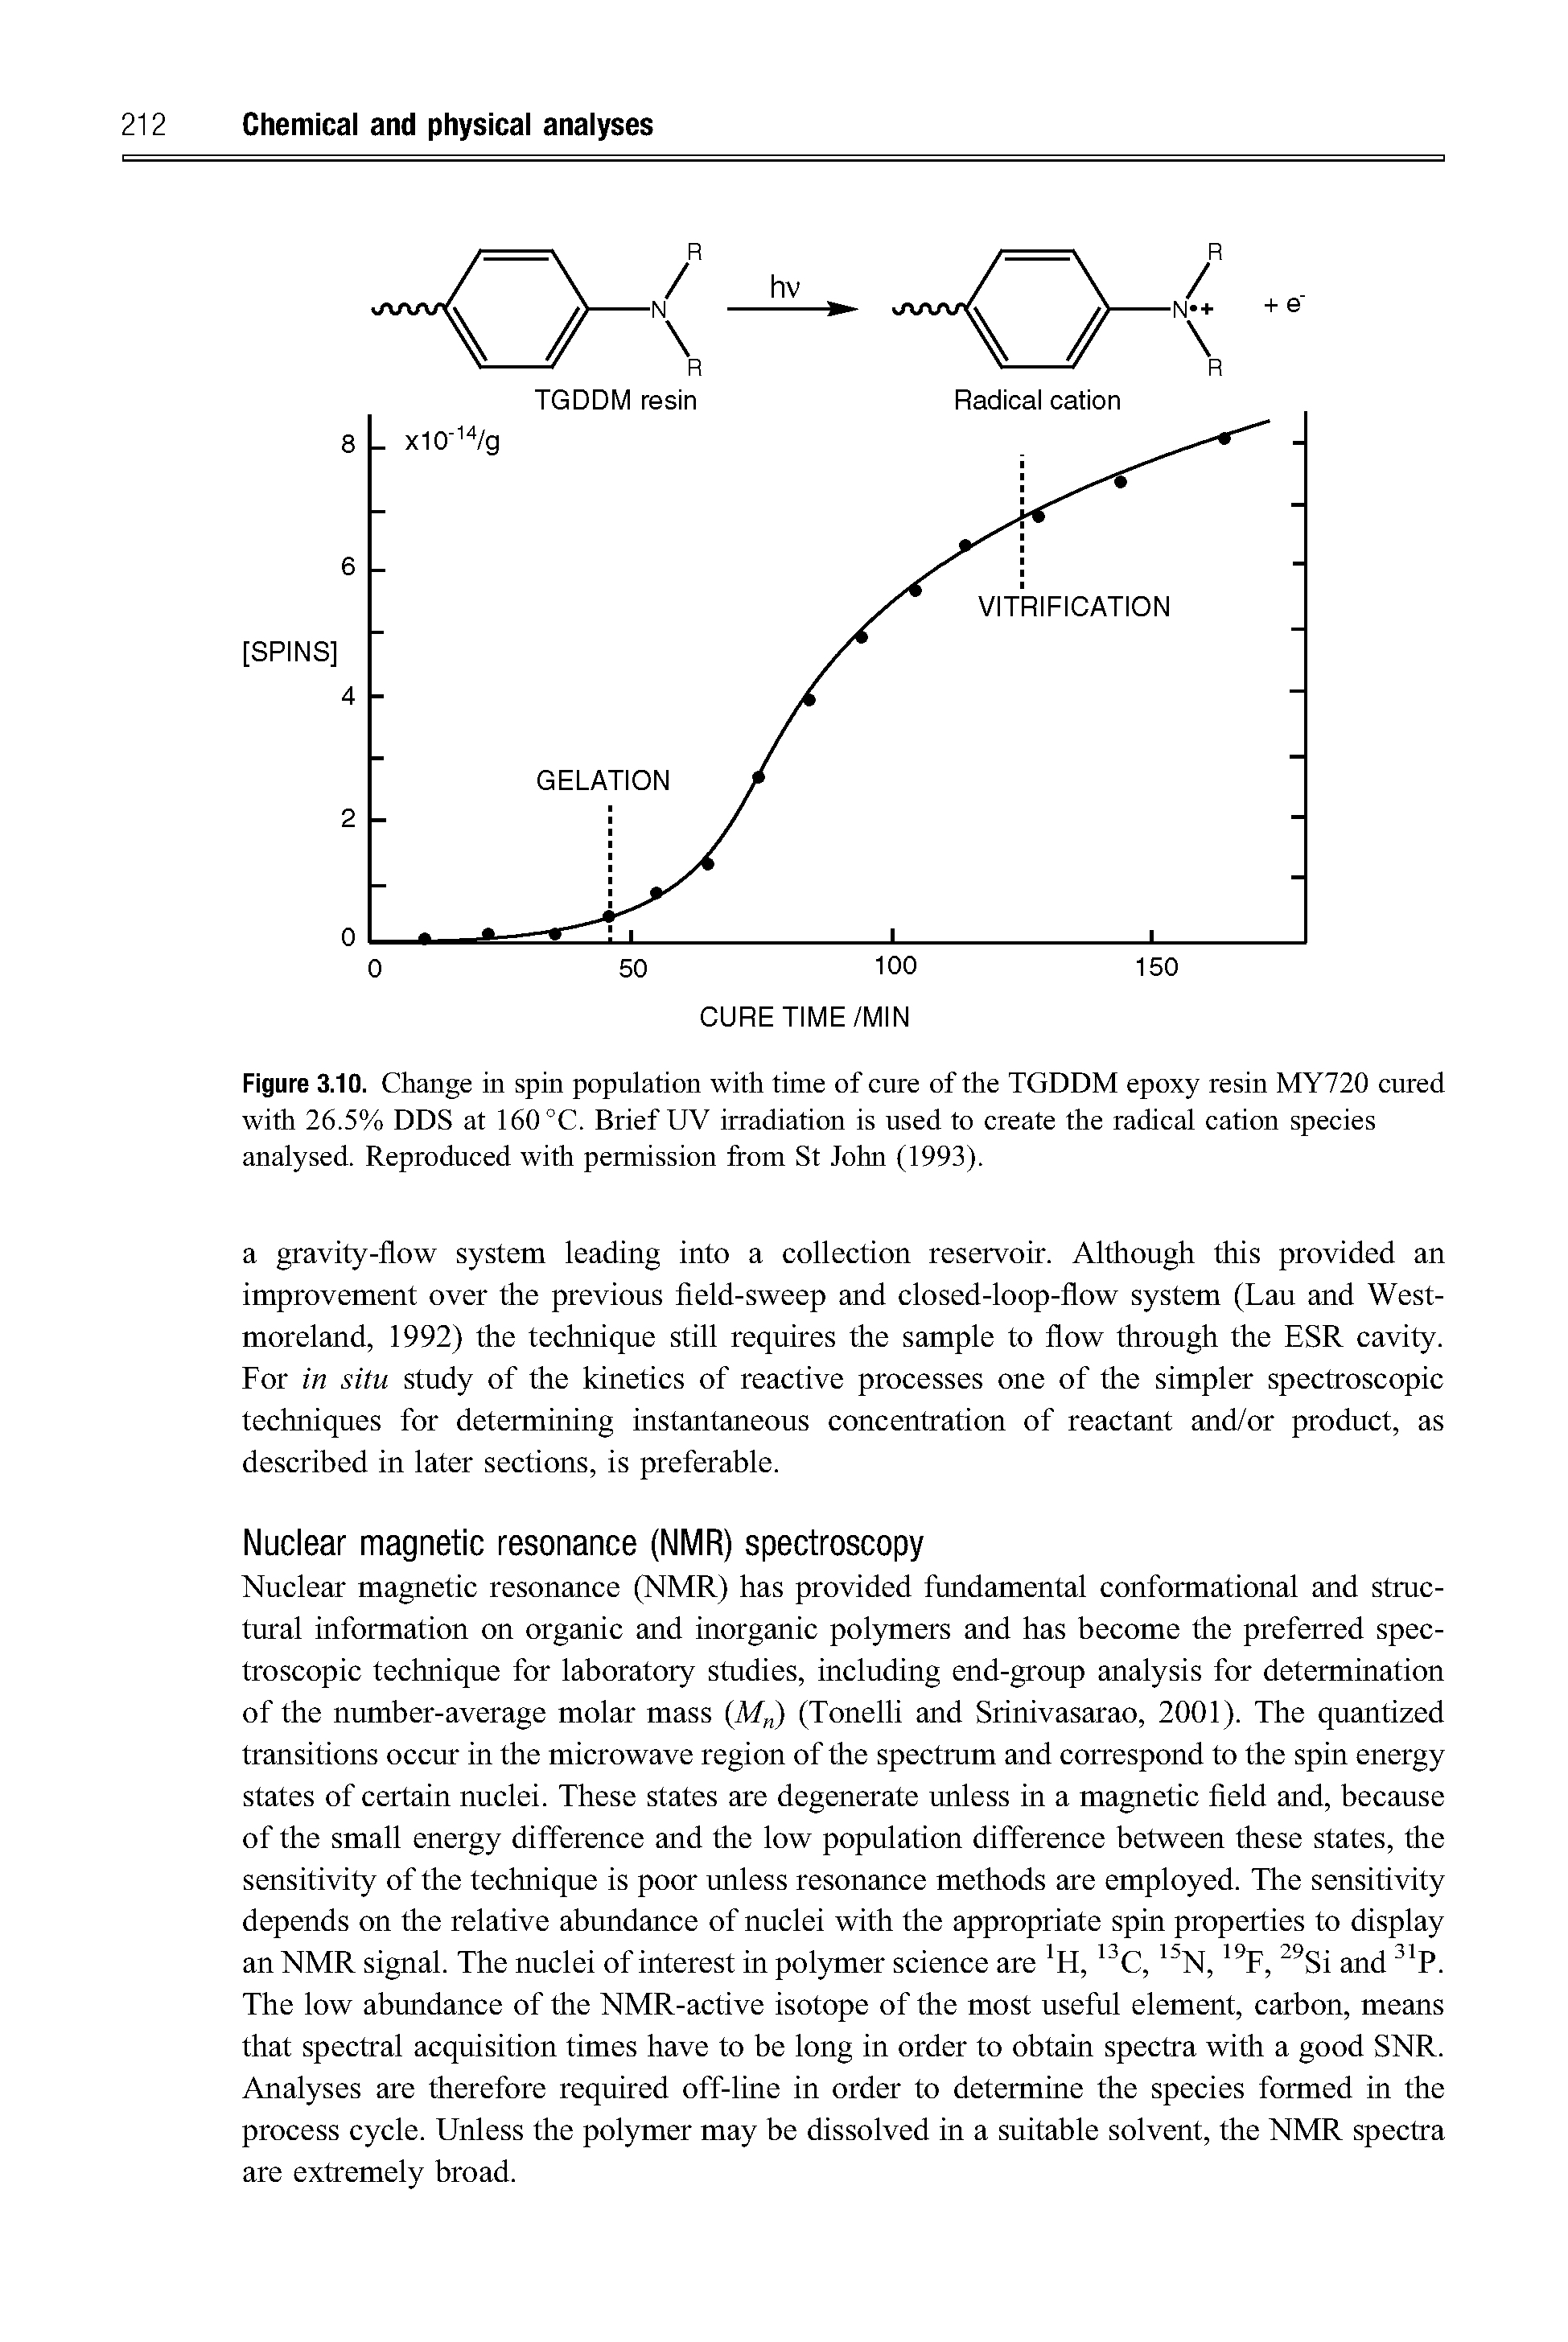 Figure 3.10. Change in spin population with time of cure of the TGDDM epoxy resin MY720 cured with 26.5% DDS at 160 °C. Brief UV irradiation is used to create the radical cation species analysed. Reproduced with permission from St John (1993).